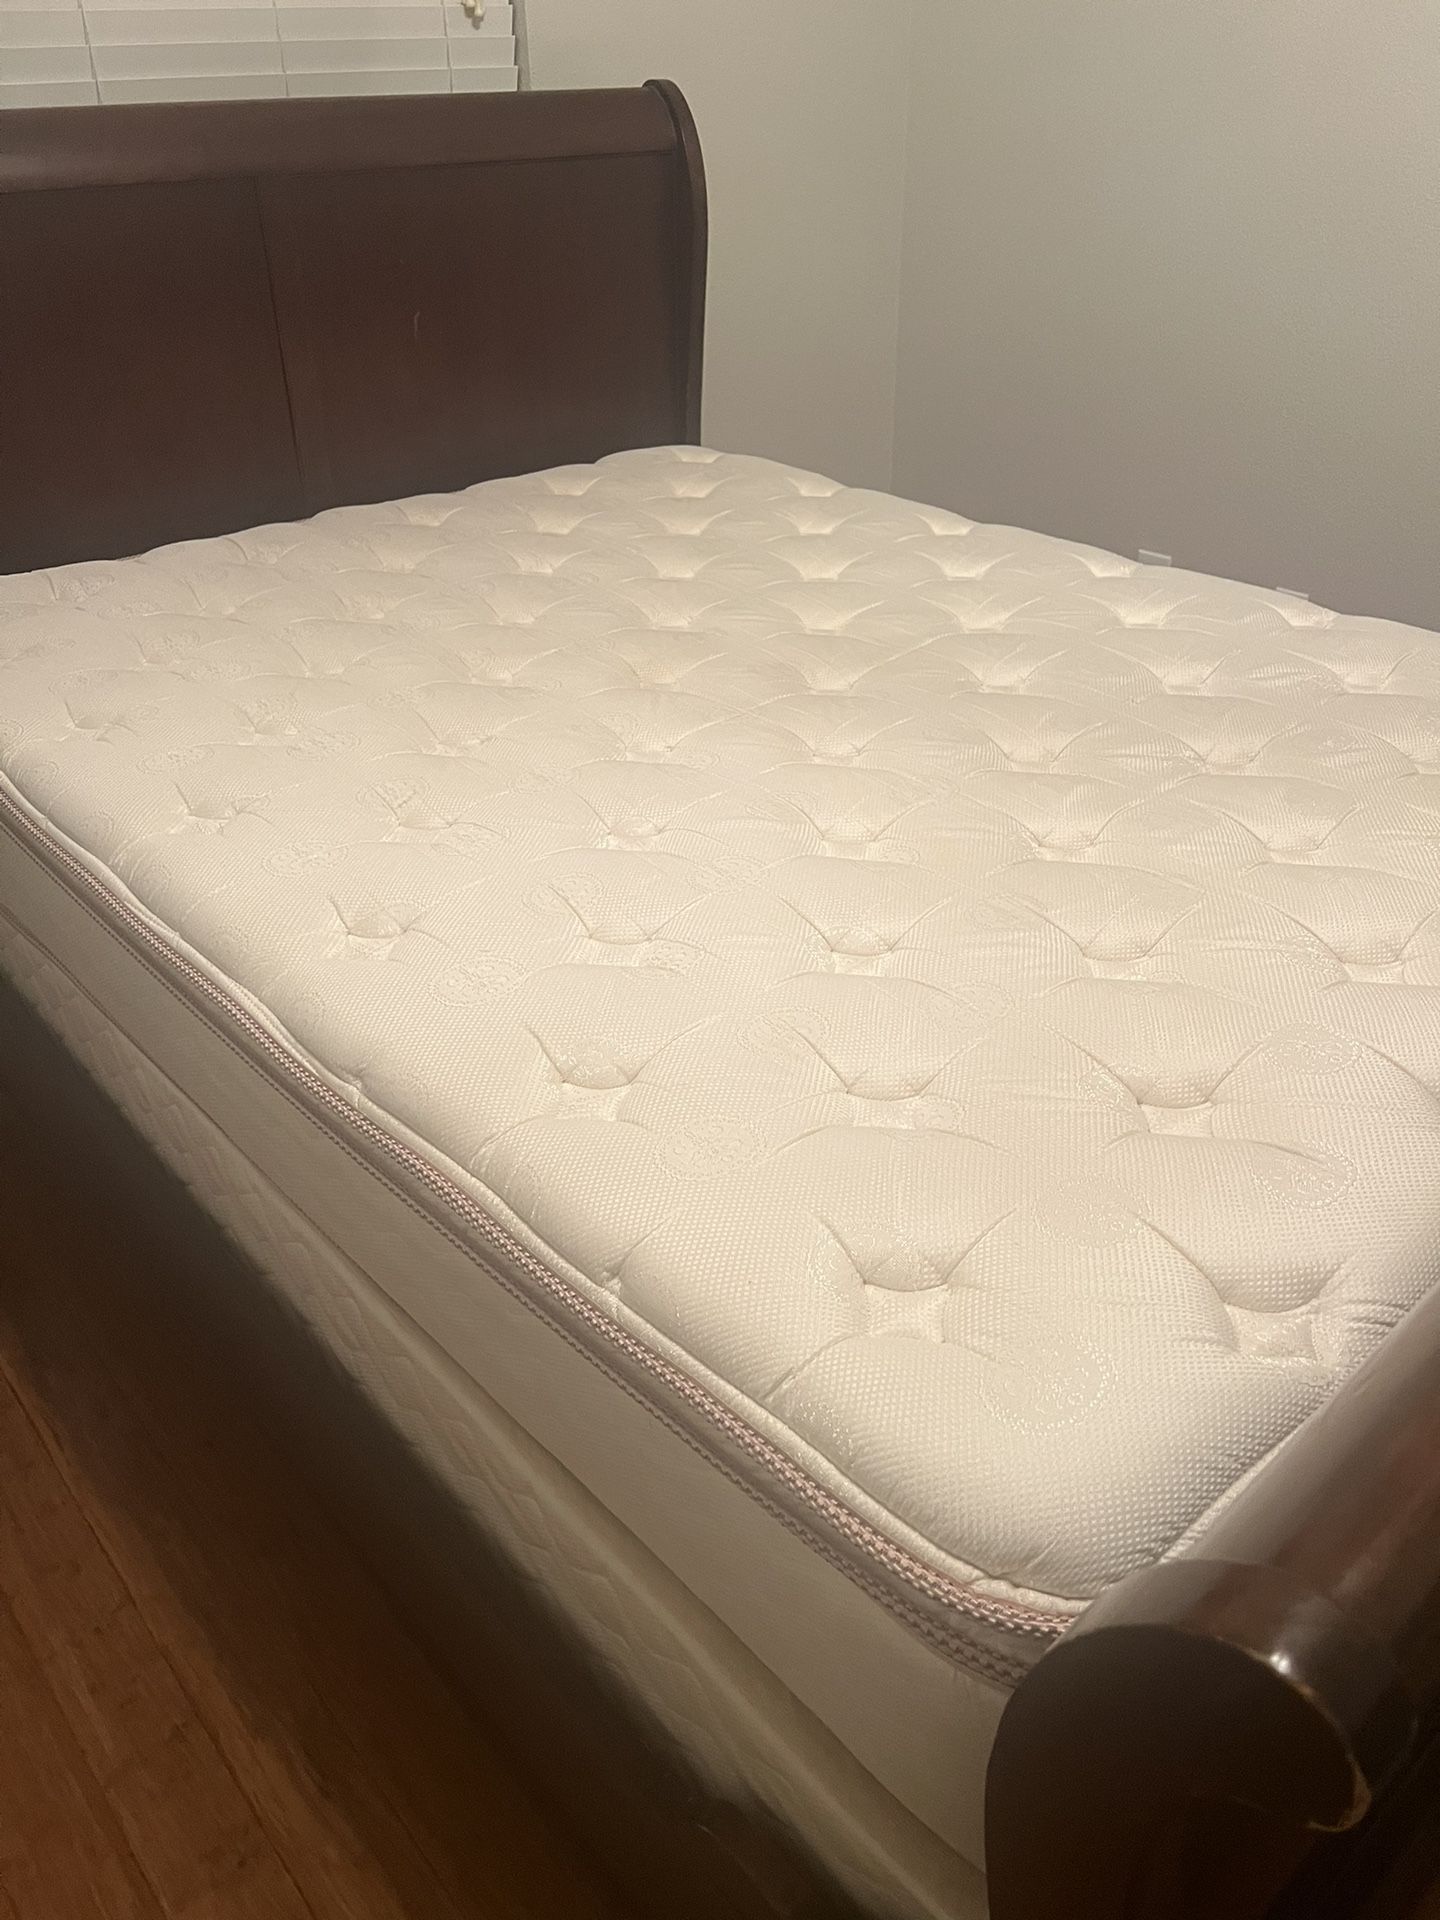 Queen Mattress and Boxspring